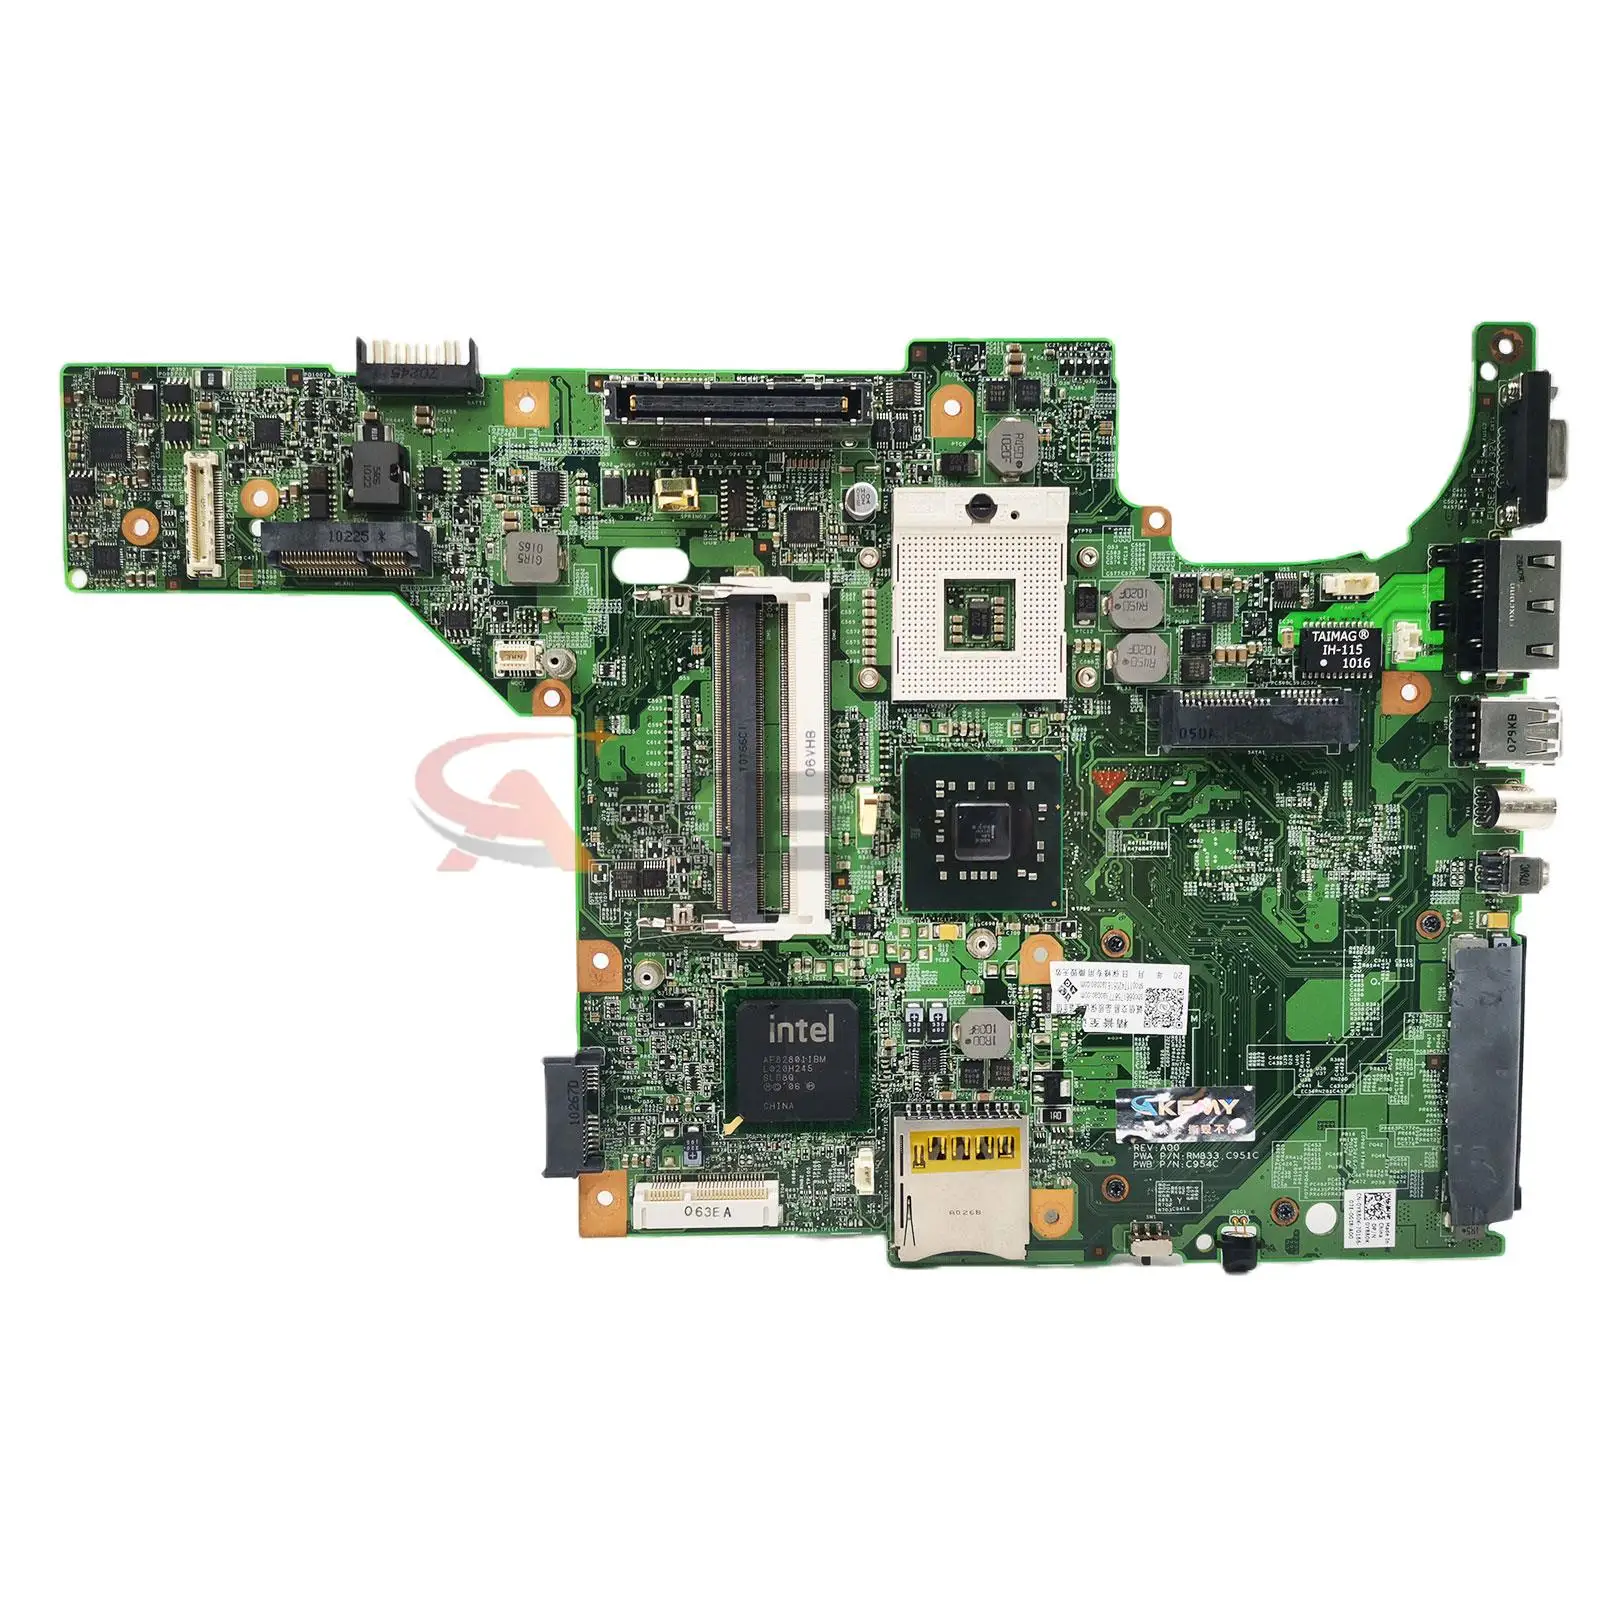 

Original For Dell Latitude E5400 Laptop Motherboard CN-0Y880K 0Y880K 07236-2 48.4X703.021 Tested Good Free Shipping